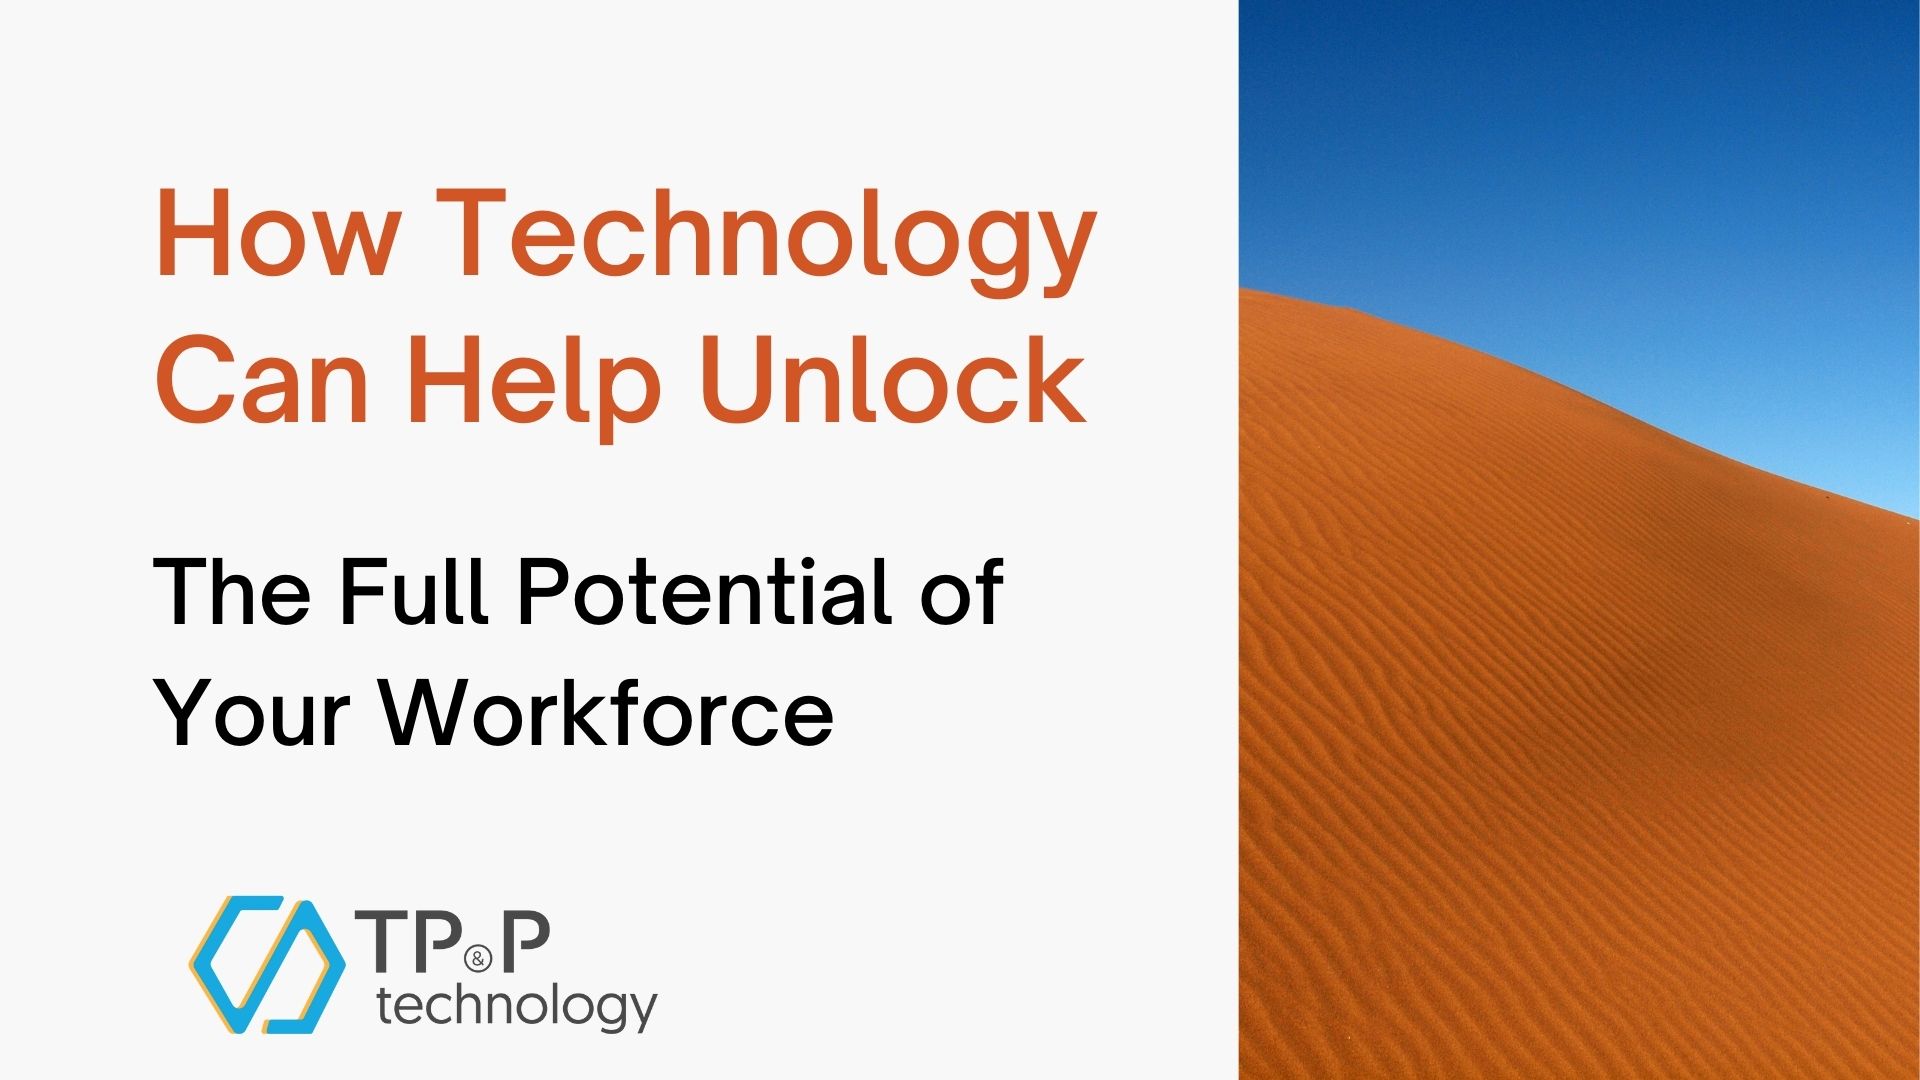 How Technology Can Help Unlock the Full Potential of Your Workforce